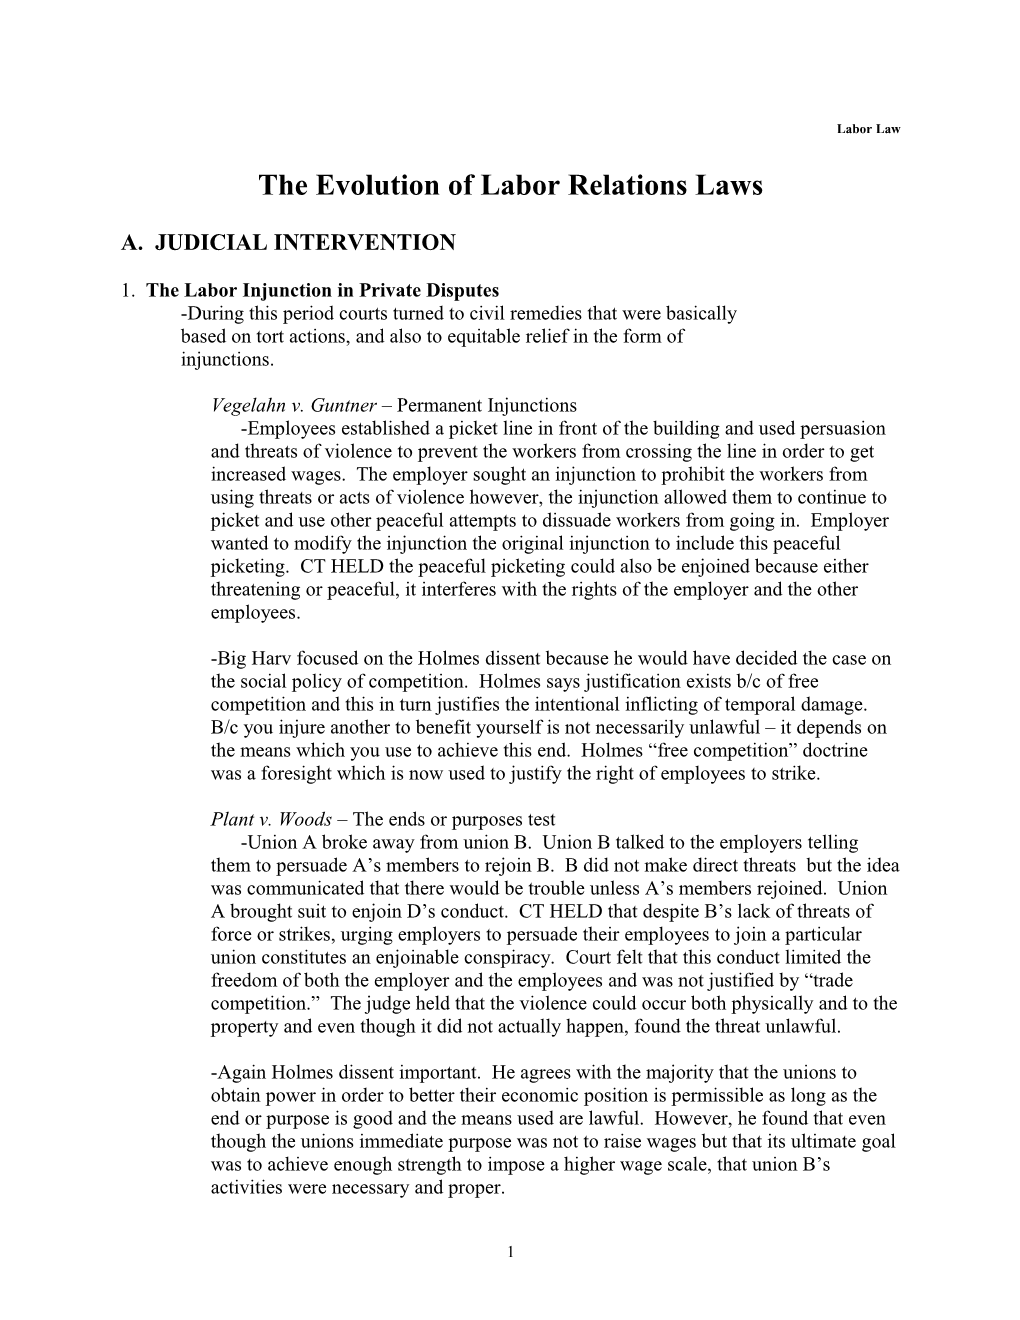 The Evolution of Labor Relations Laws